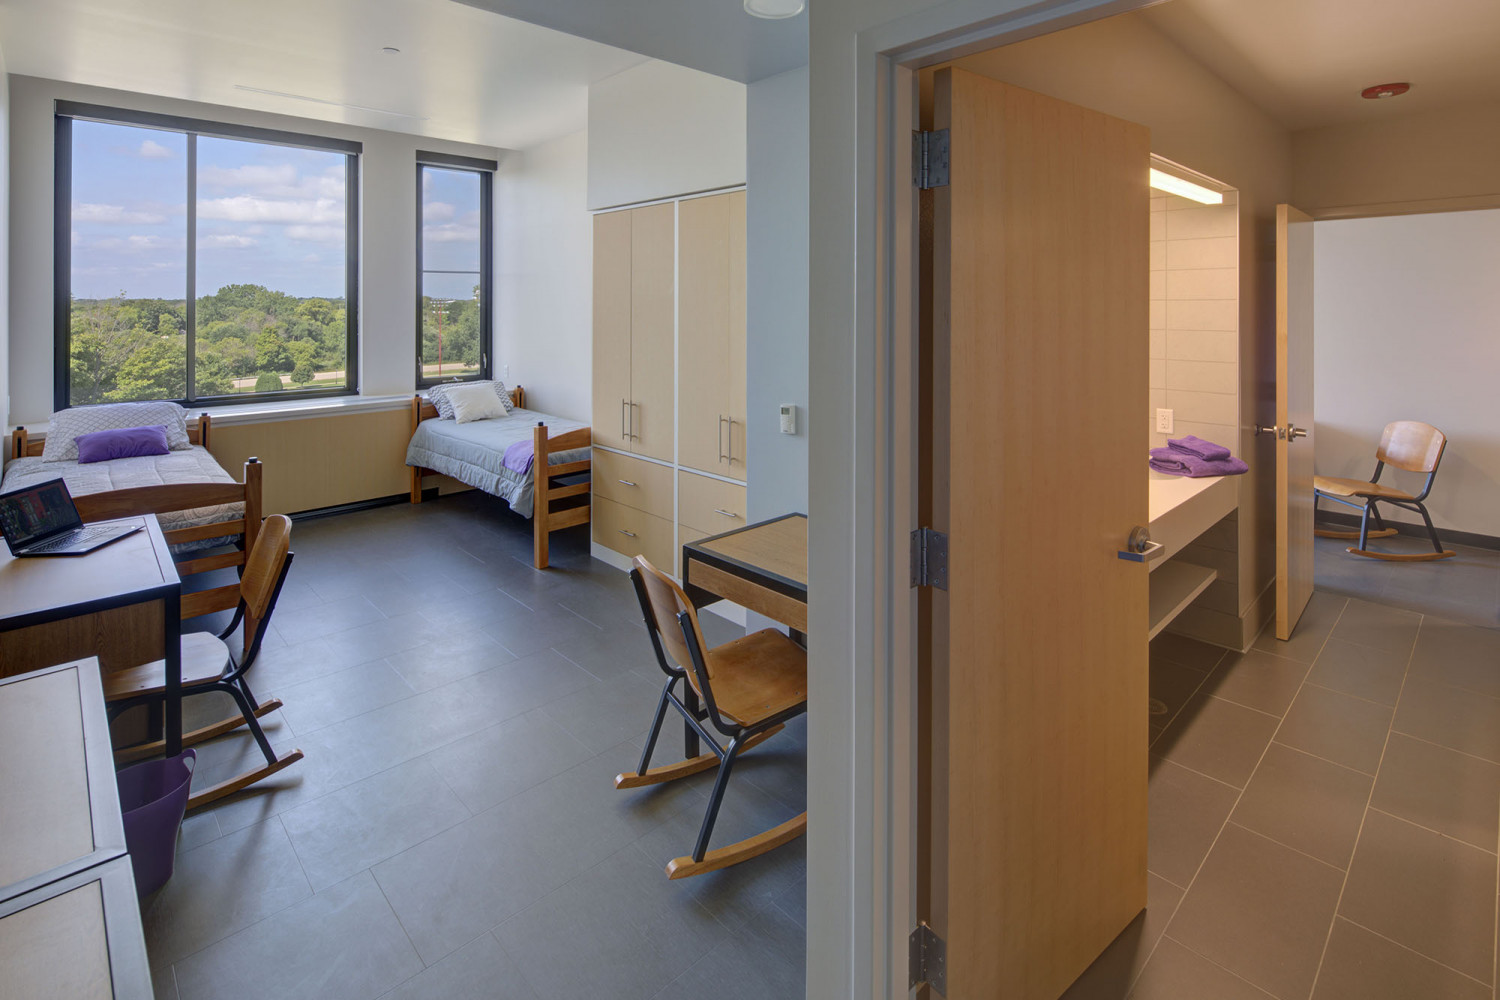 A dorm room in The Tower.